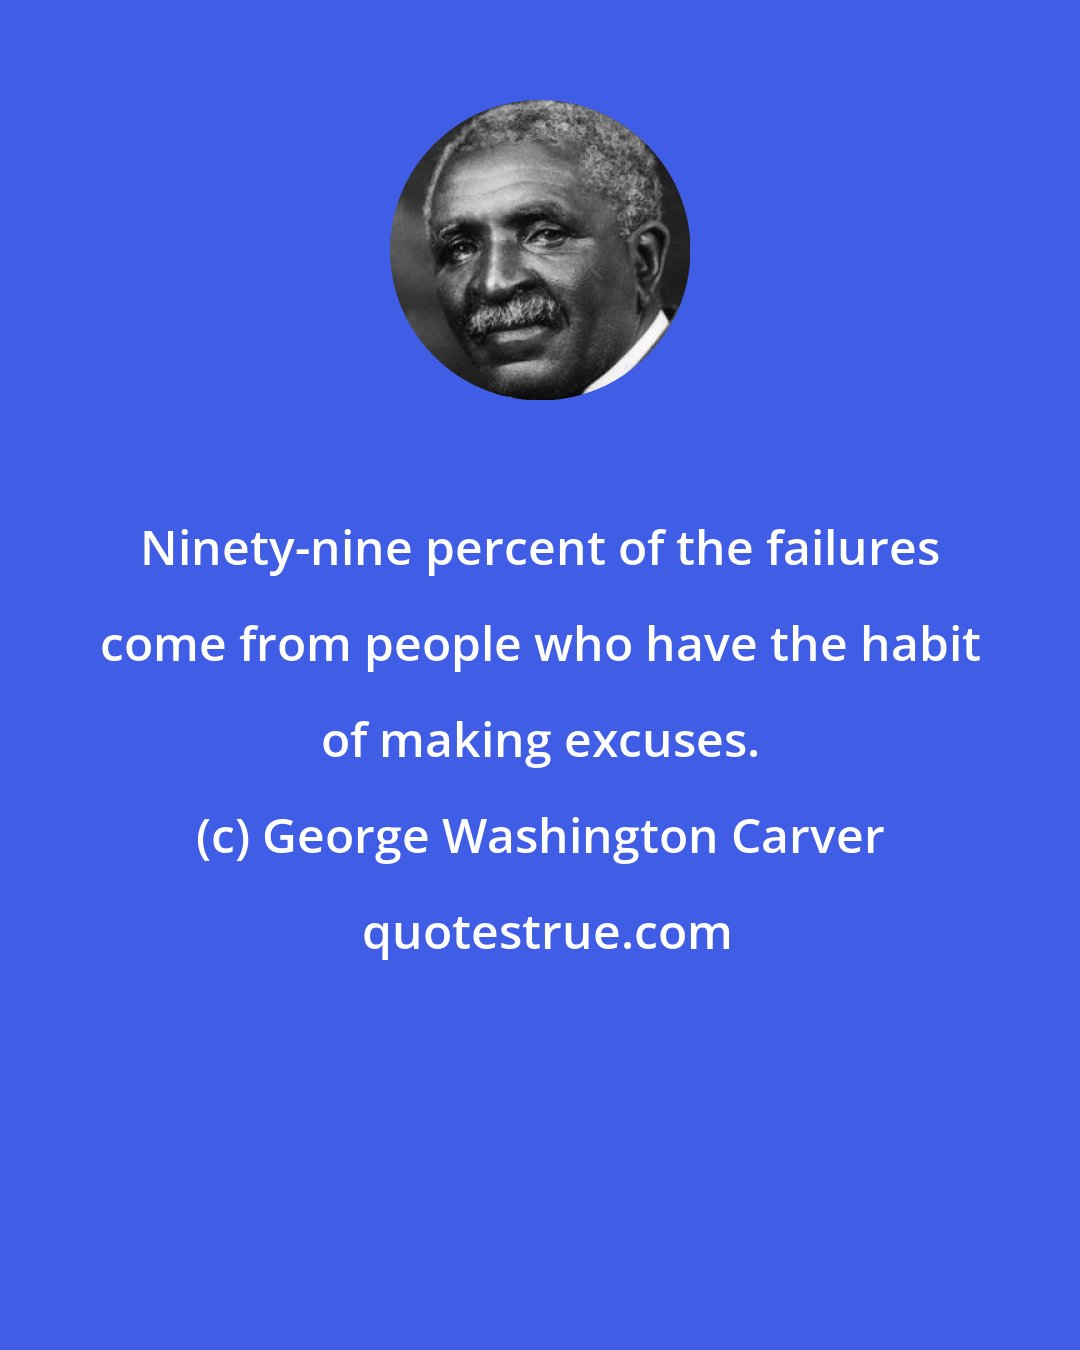 George Washington Carver: Ninety-nine percent of the failures come from people who have the habit of making excuses.